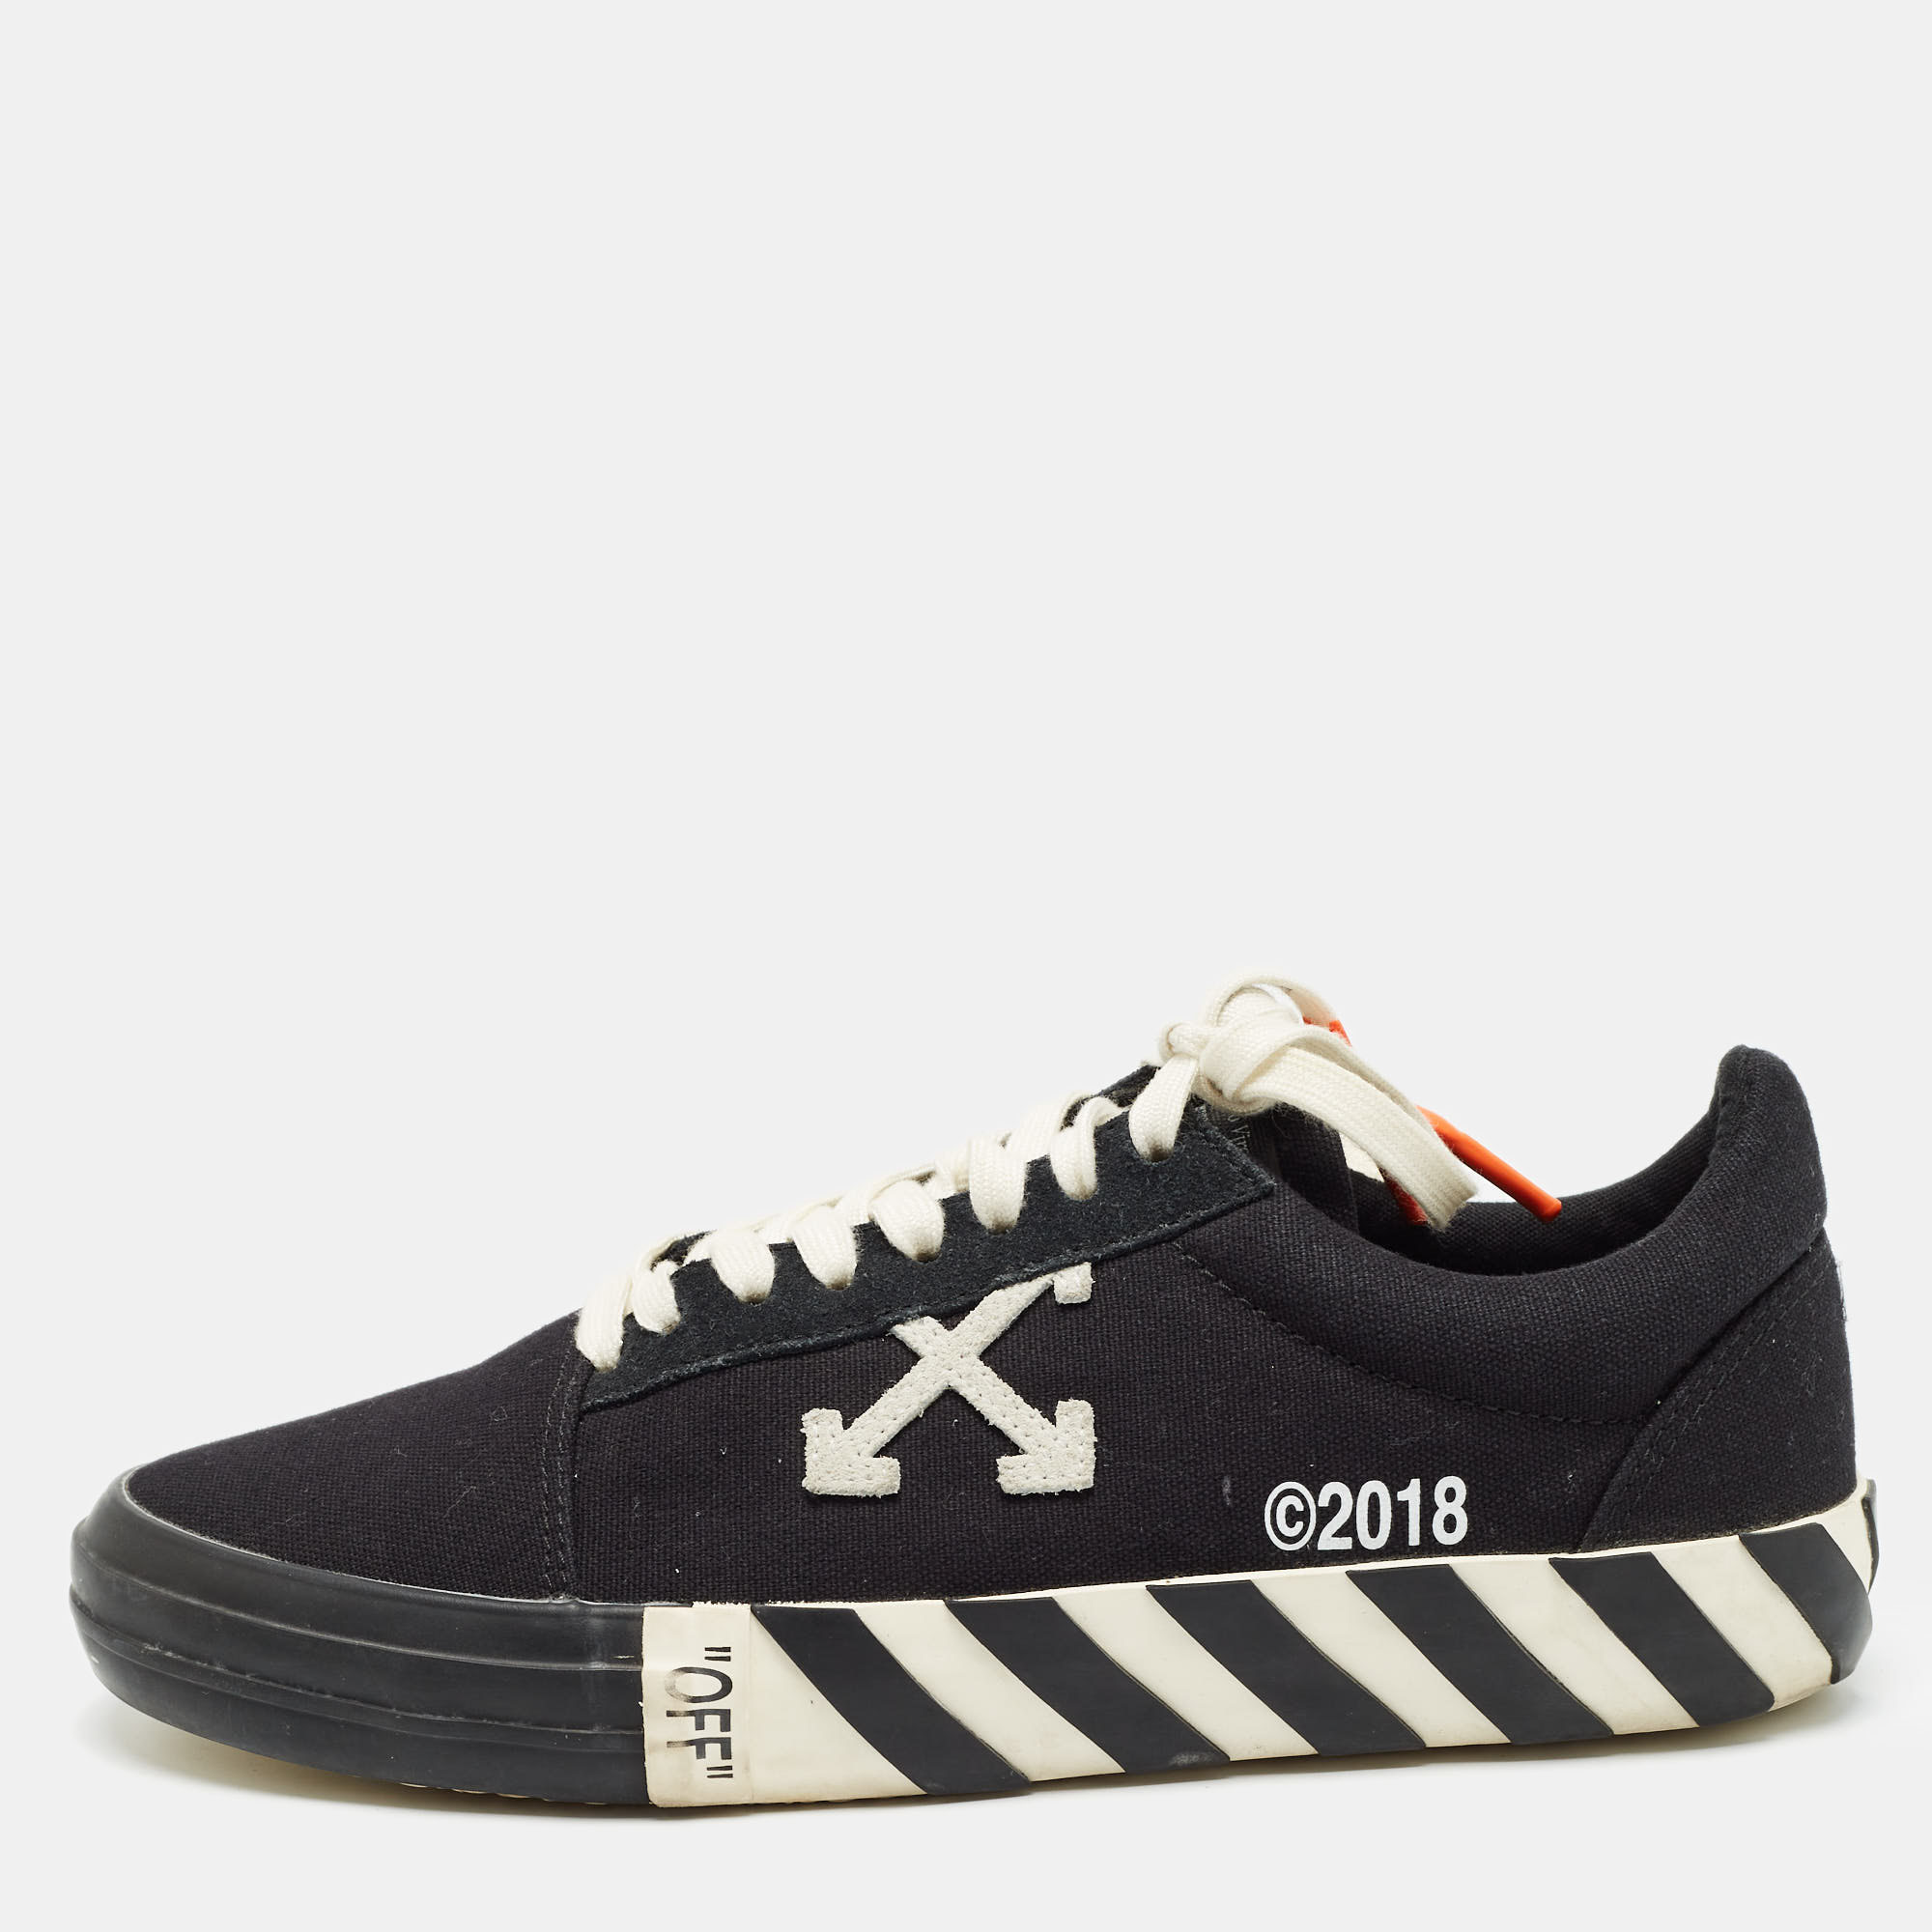 Off-white black canvas vulcanized low top sneakers size 41